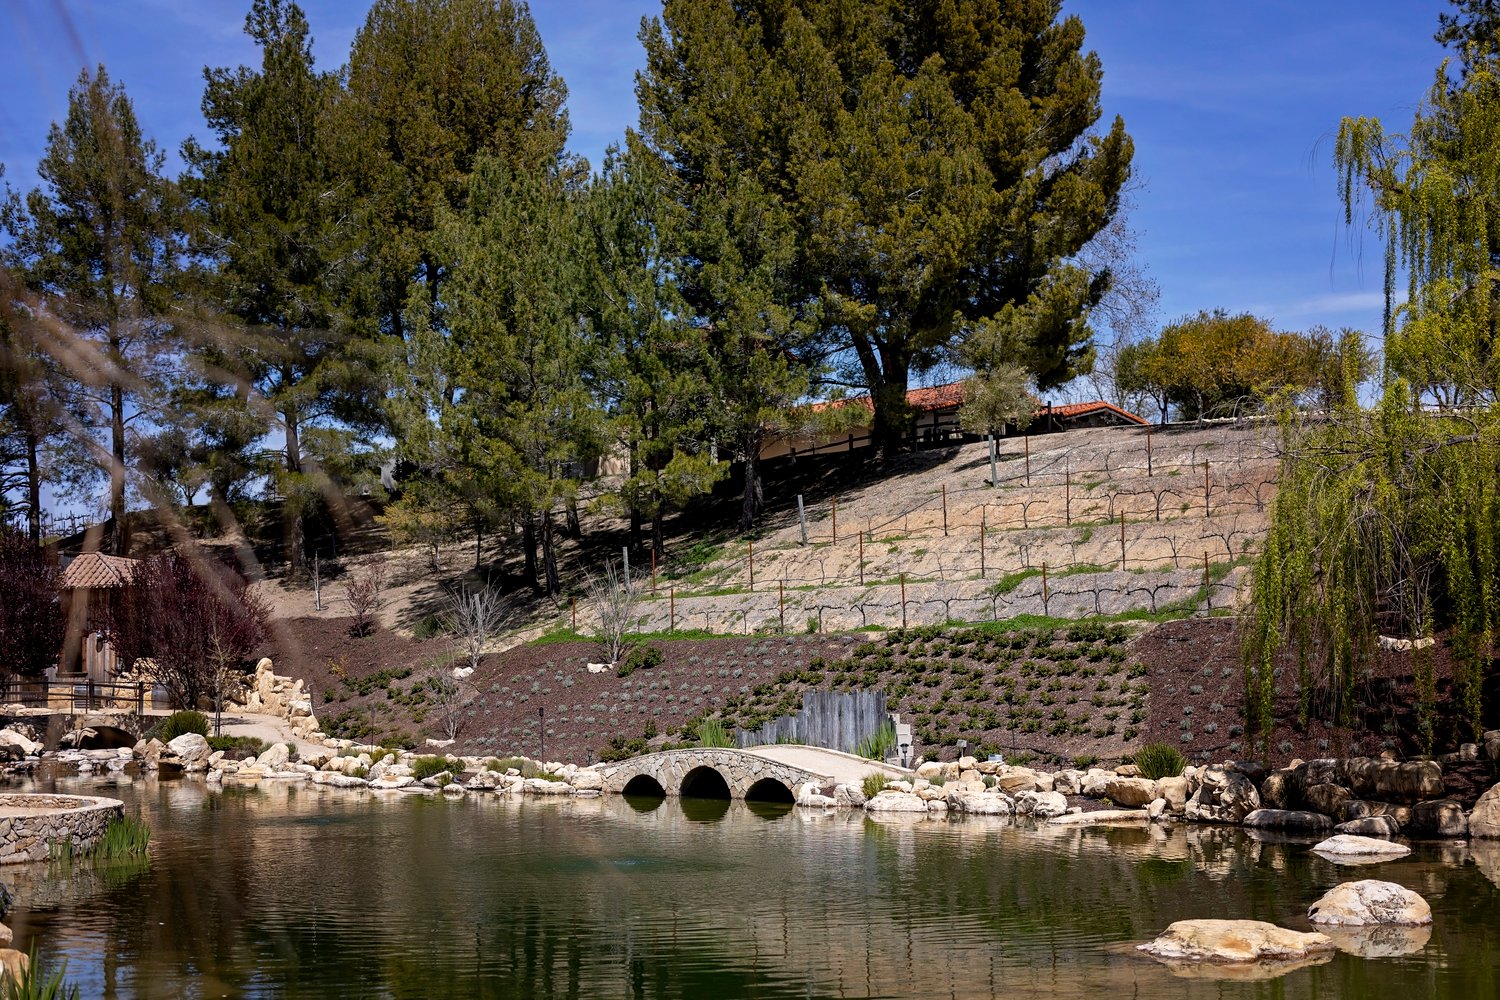 view of a pond with an arched stone bridge